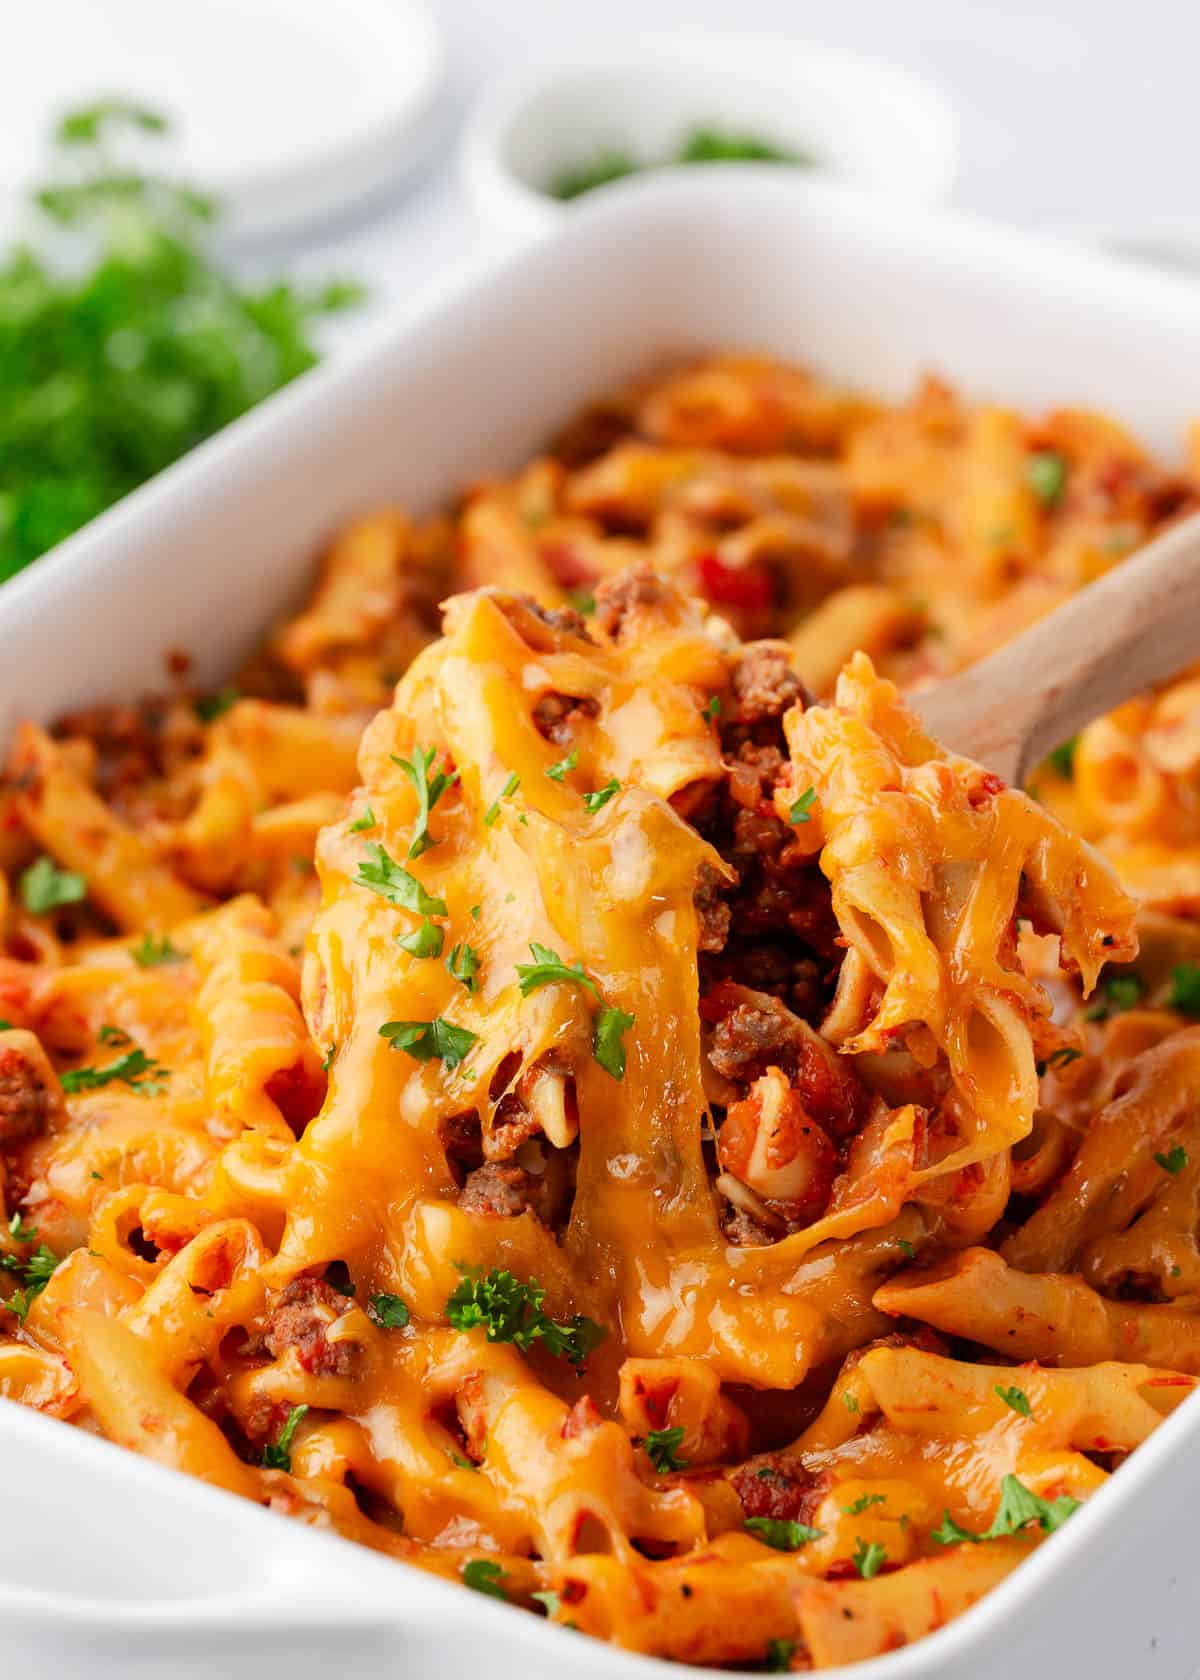 Spoonful of ground beef casserole.